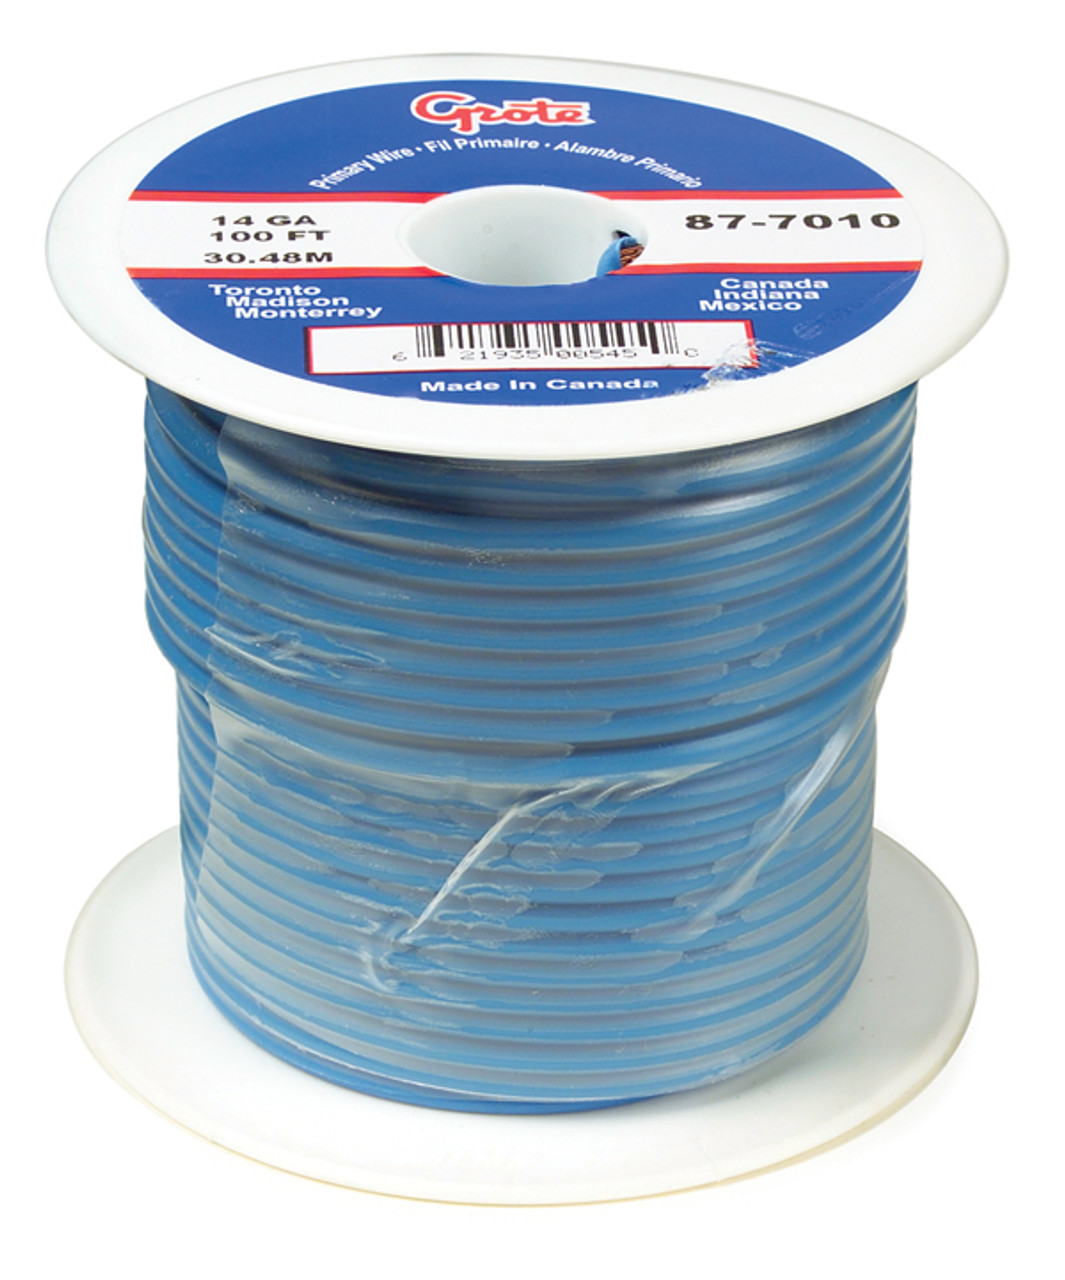 12 AWG General Purpose Thermo Plastic Wire @ 25' - Blue  89-6010